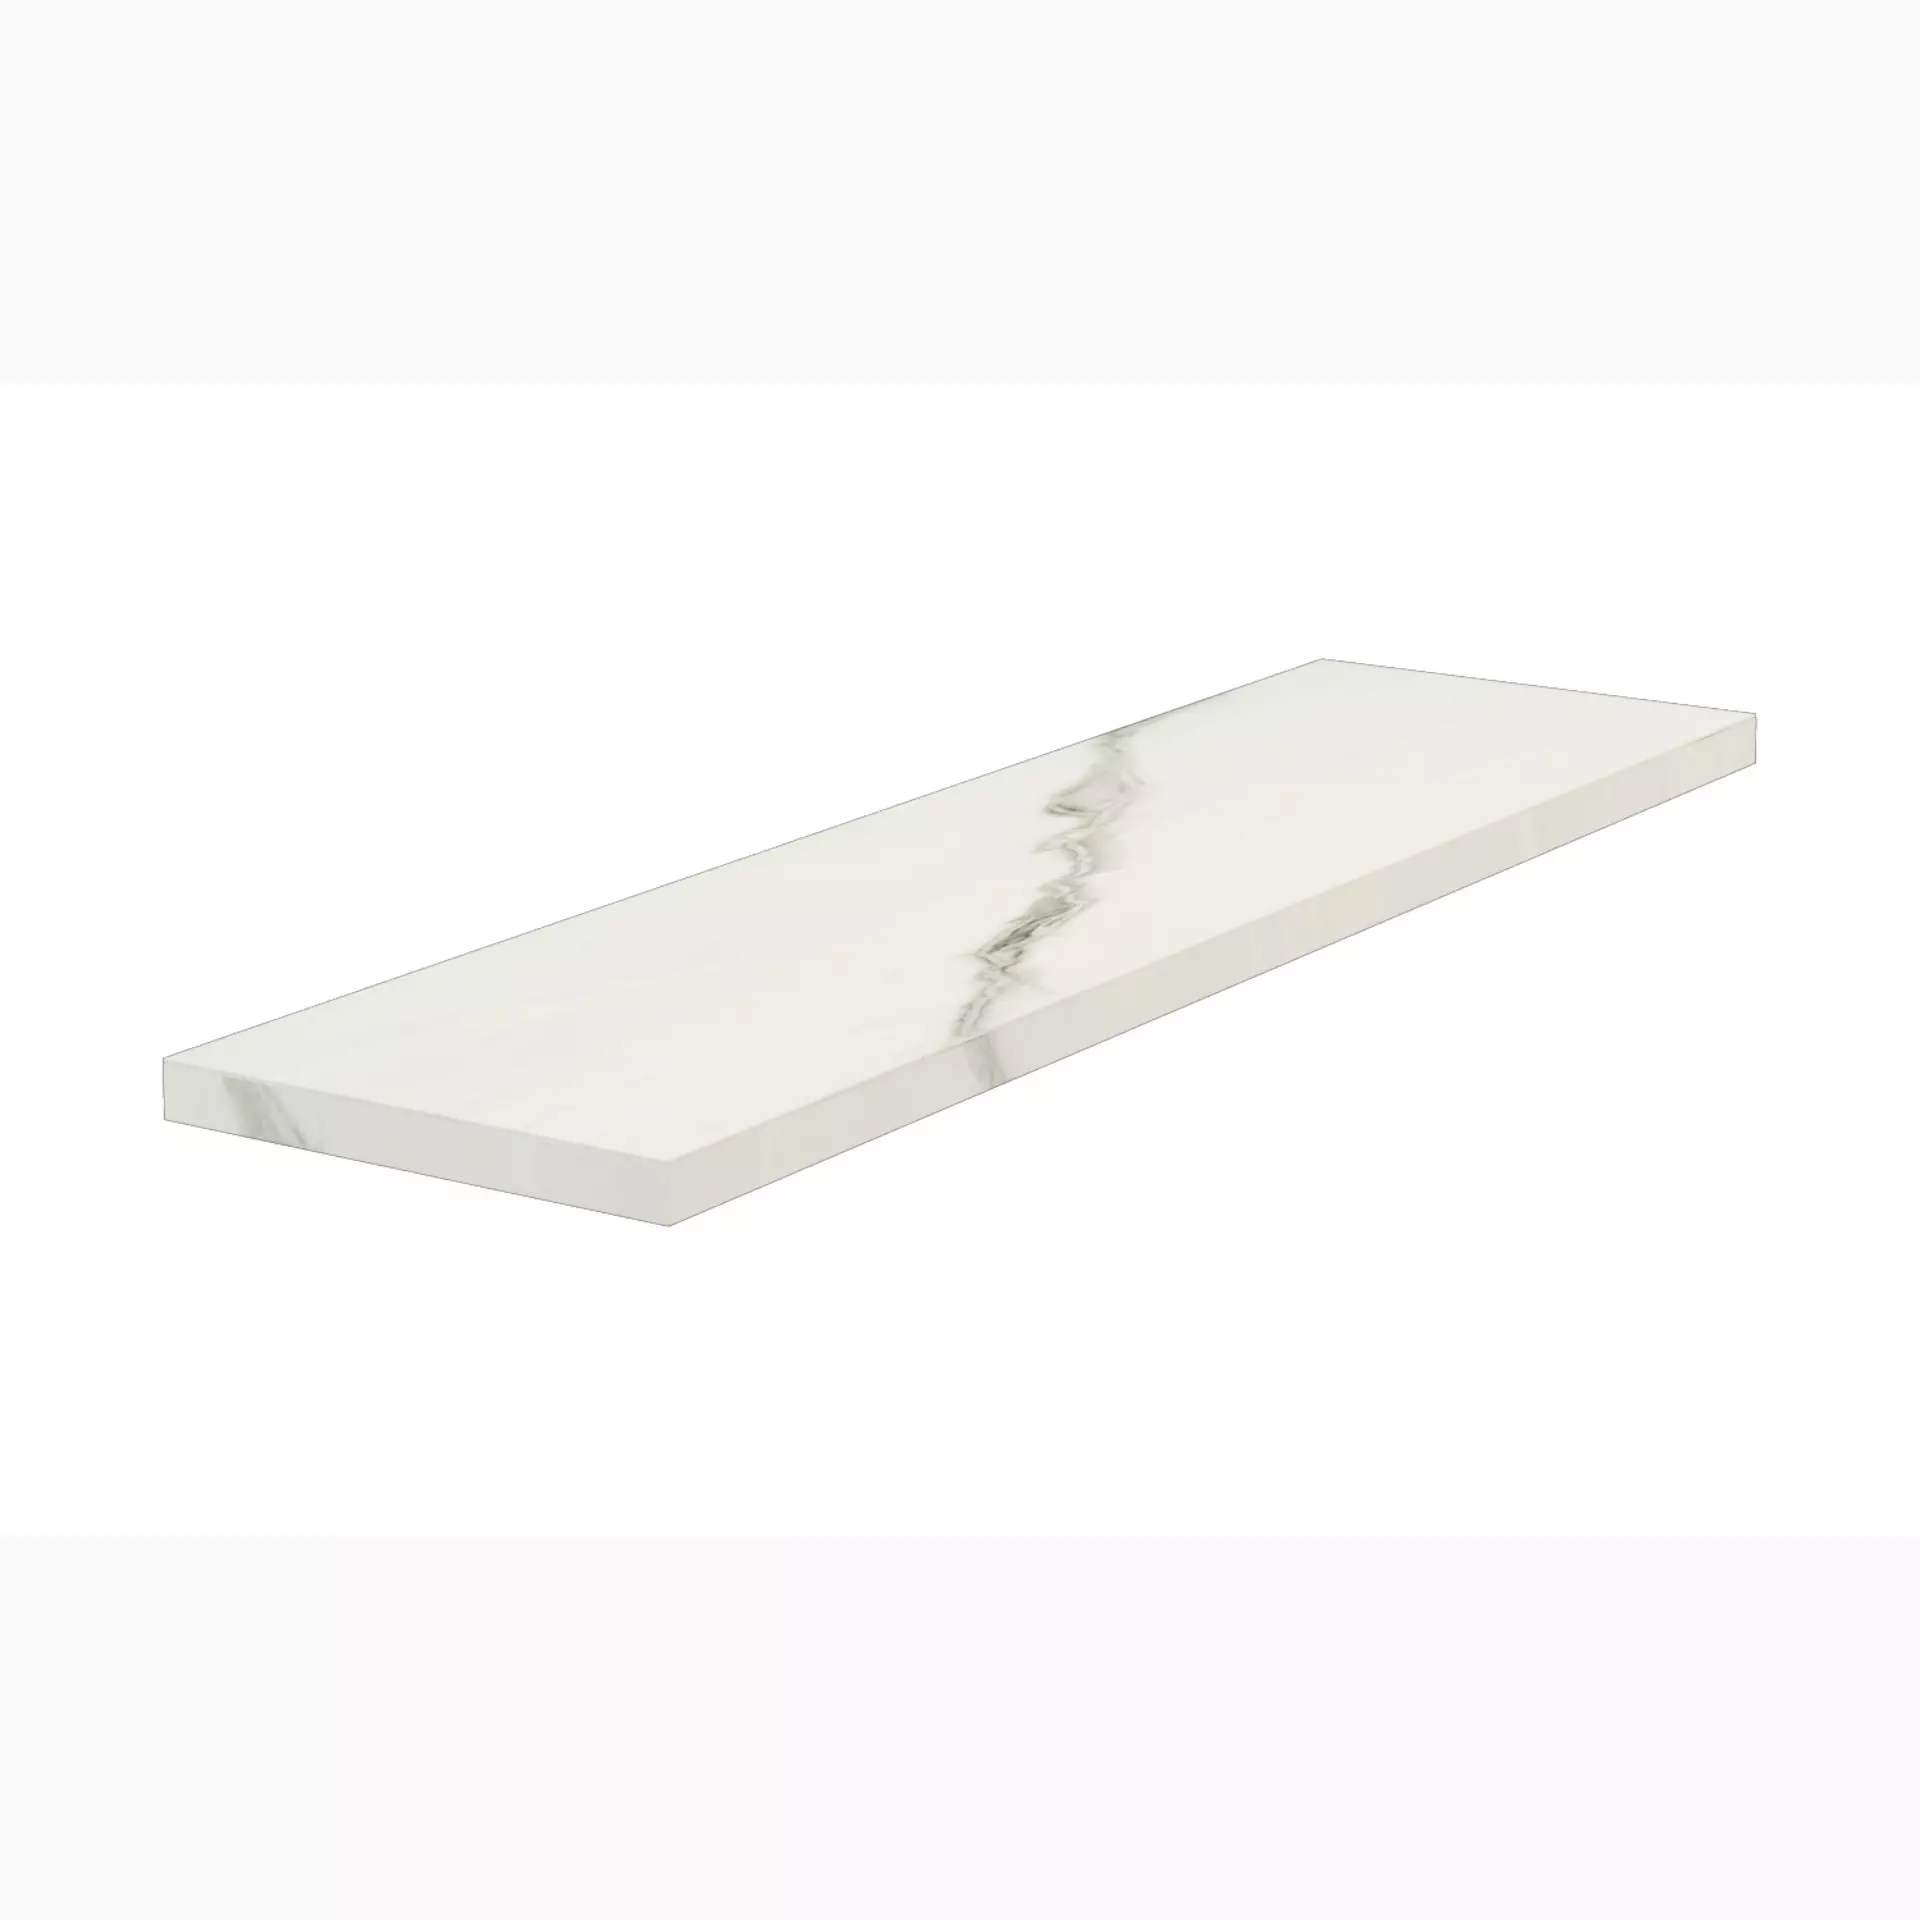 Del Conca Hpm Premiere Onice Bianco Hpm Naturale Corner plate Step Right G3PM20RGD 33x120cm rectified 8,5mm